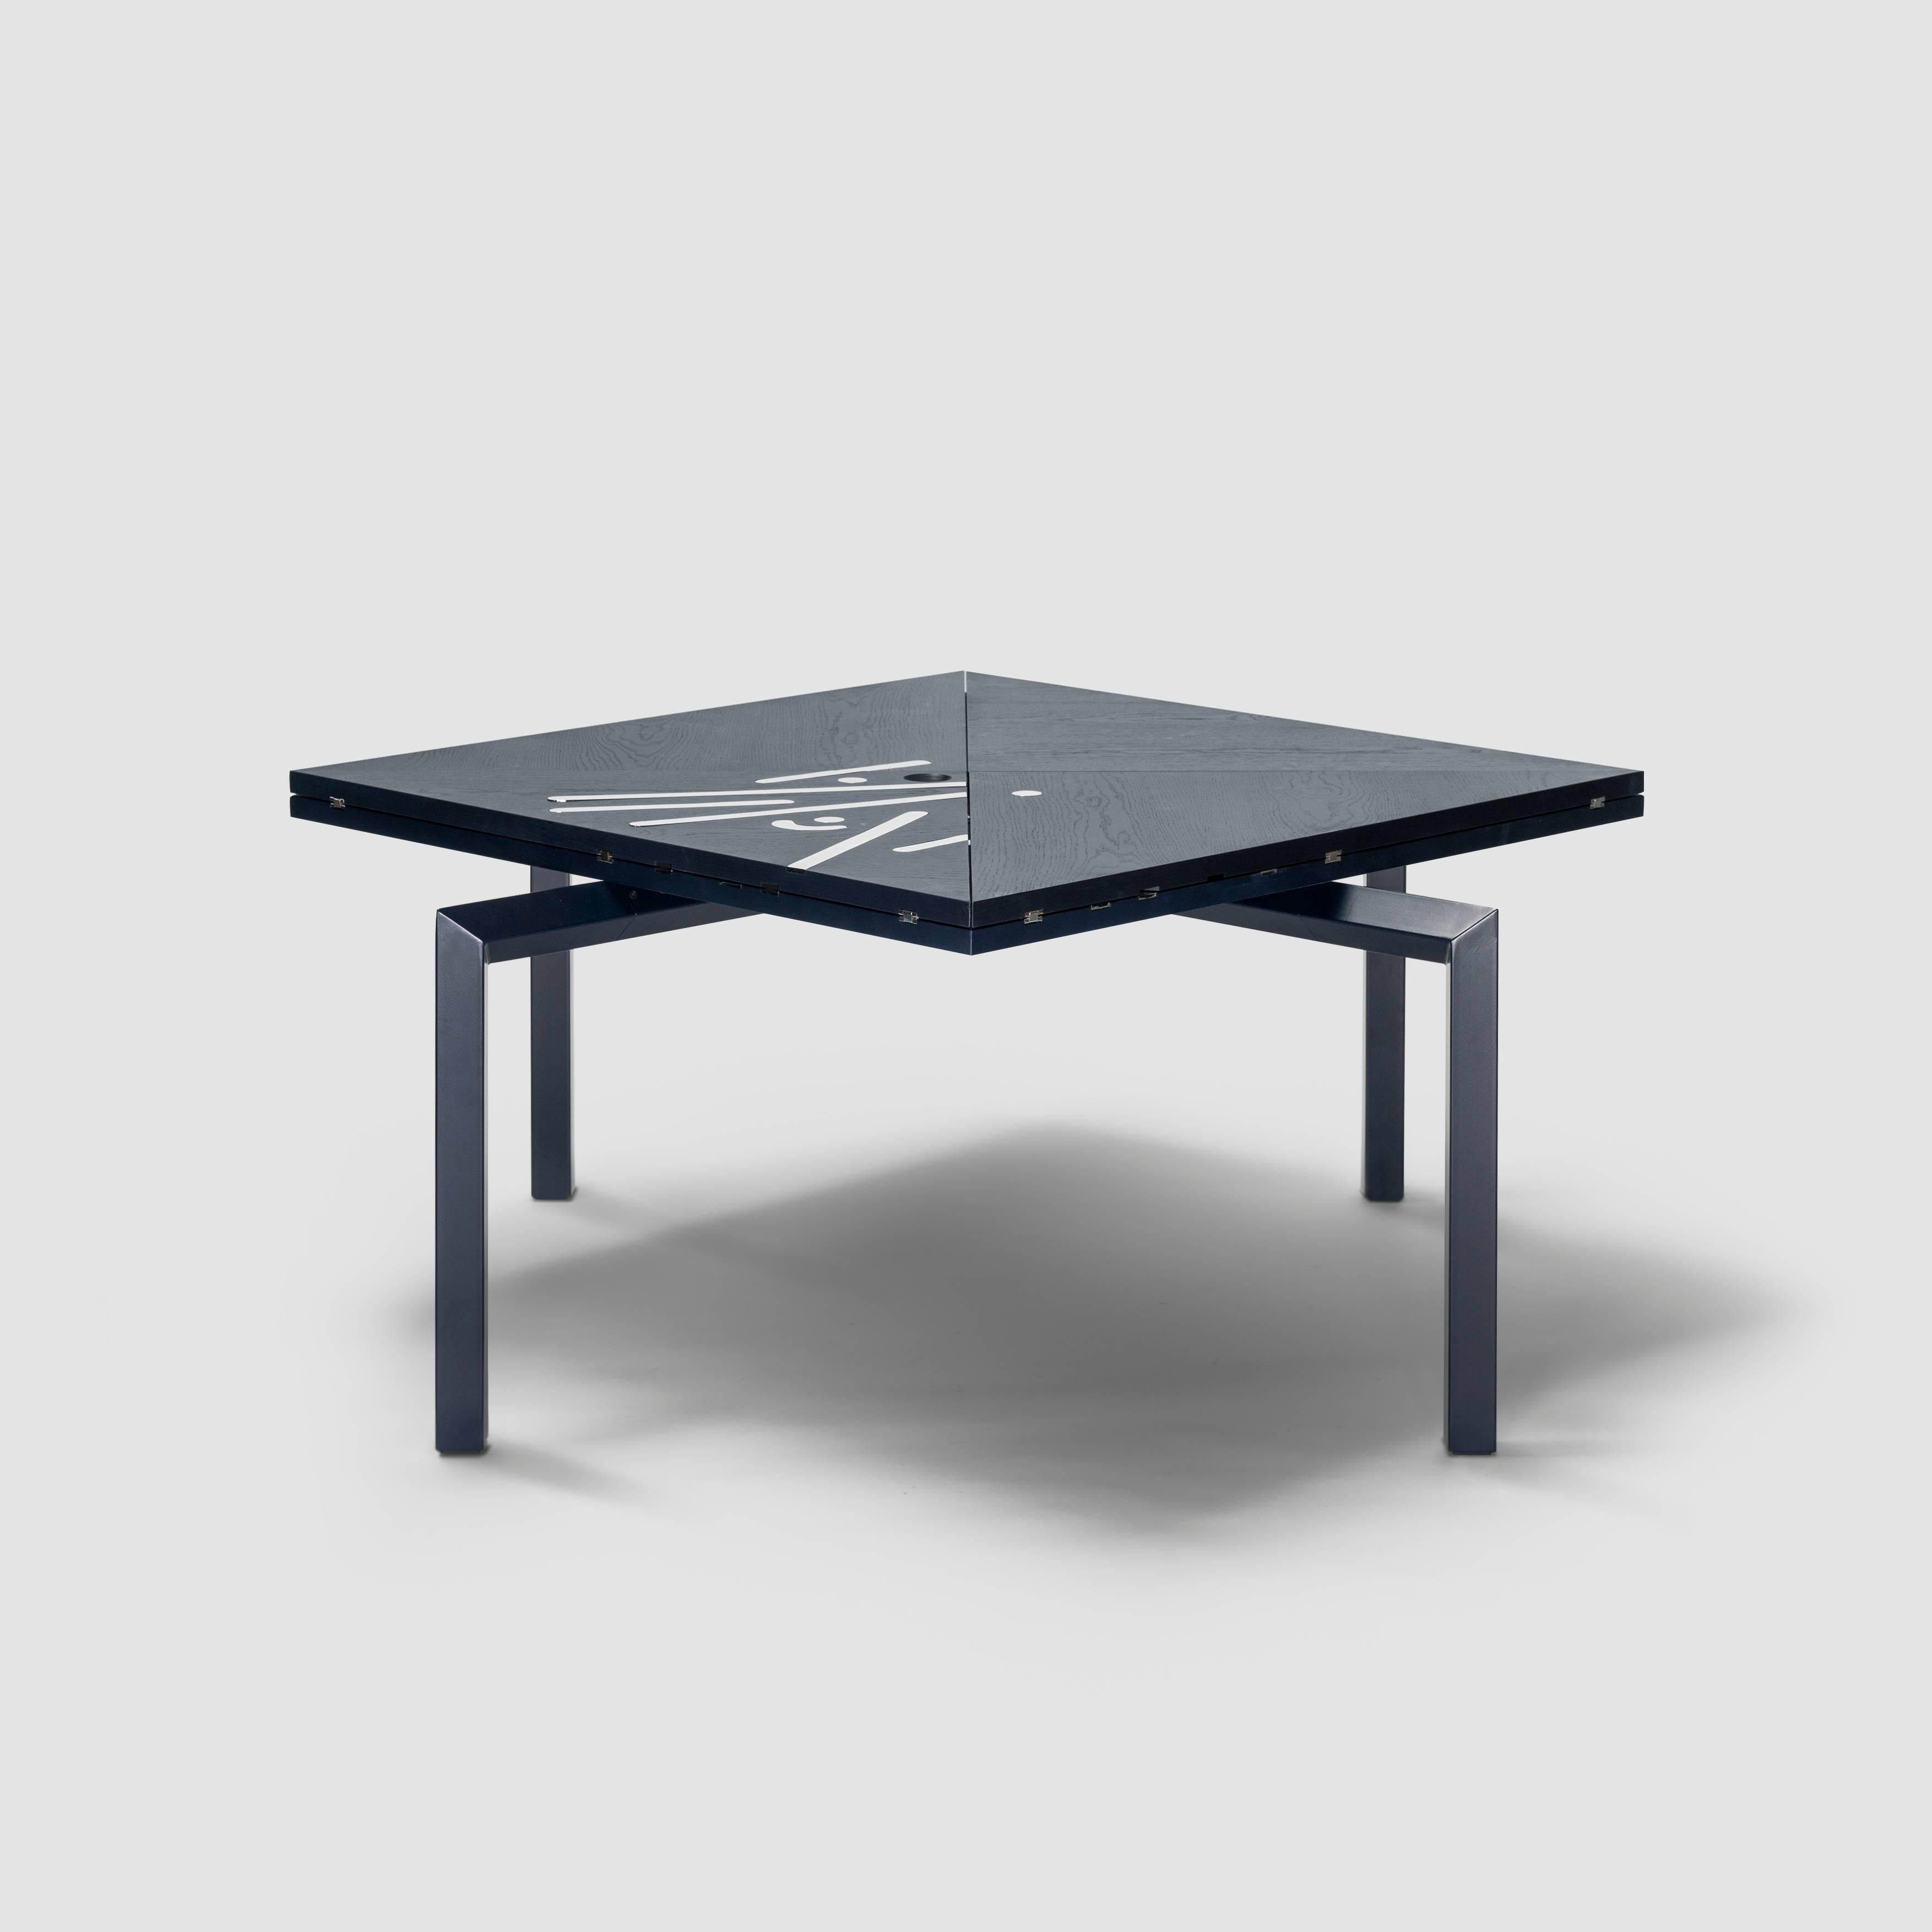 Spanish Limited Edition Alella Table by Lluis Clotet